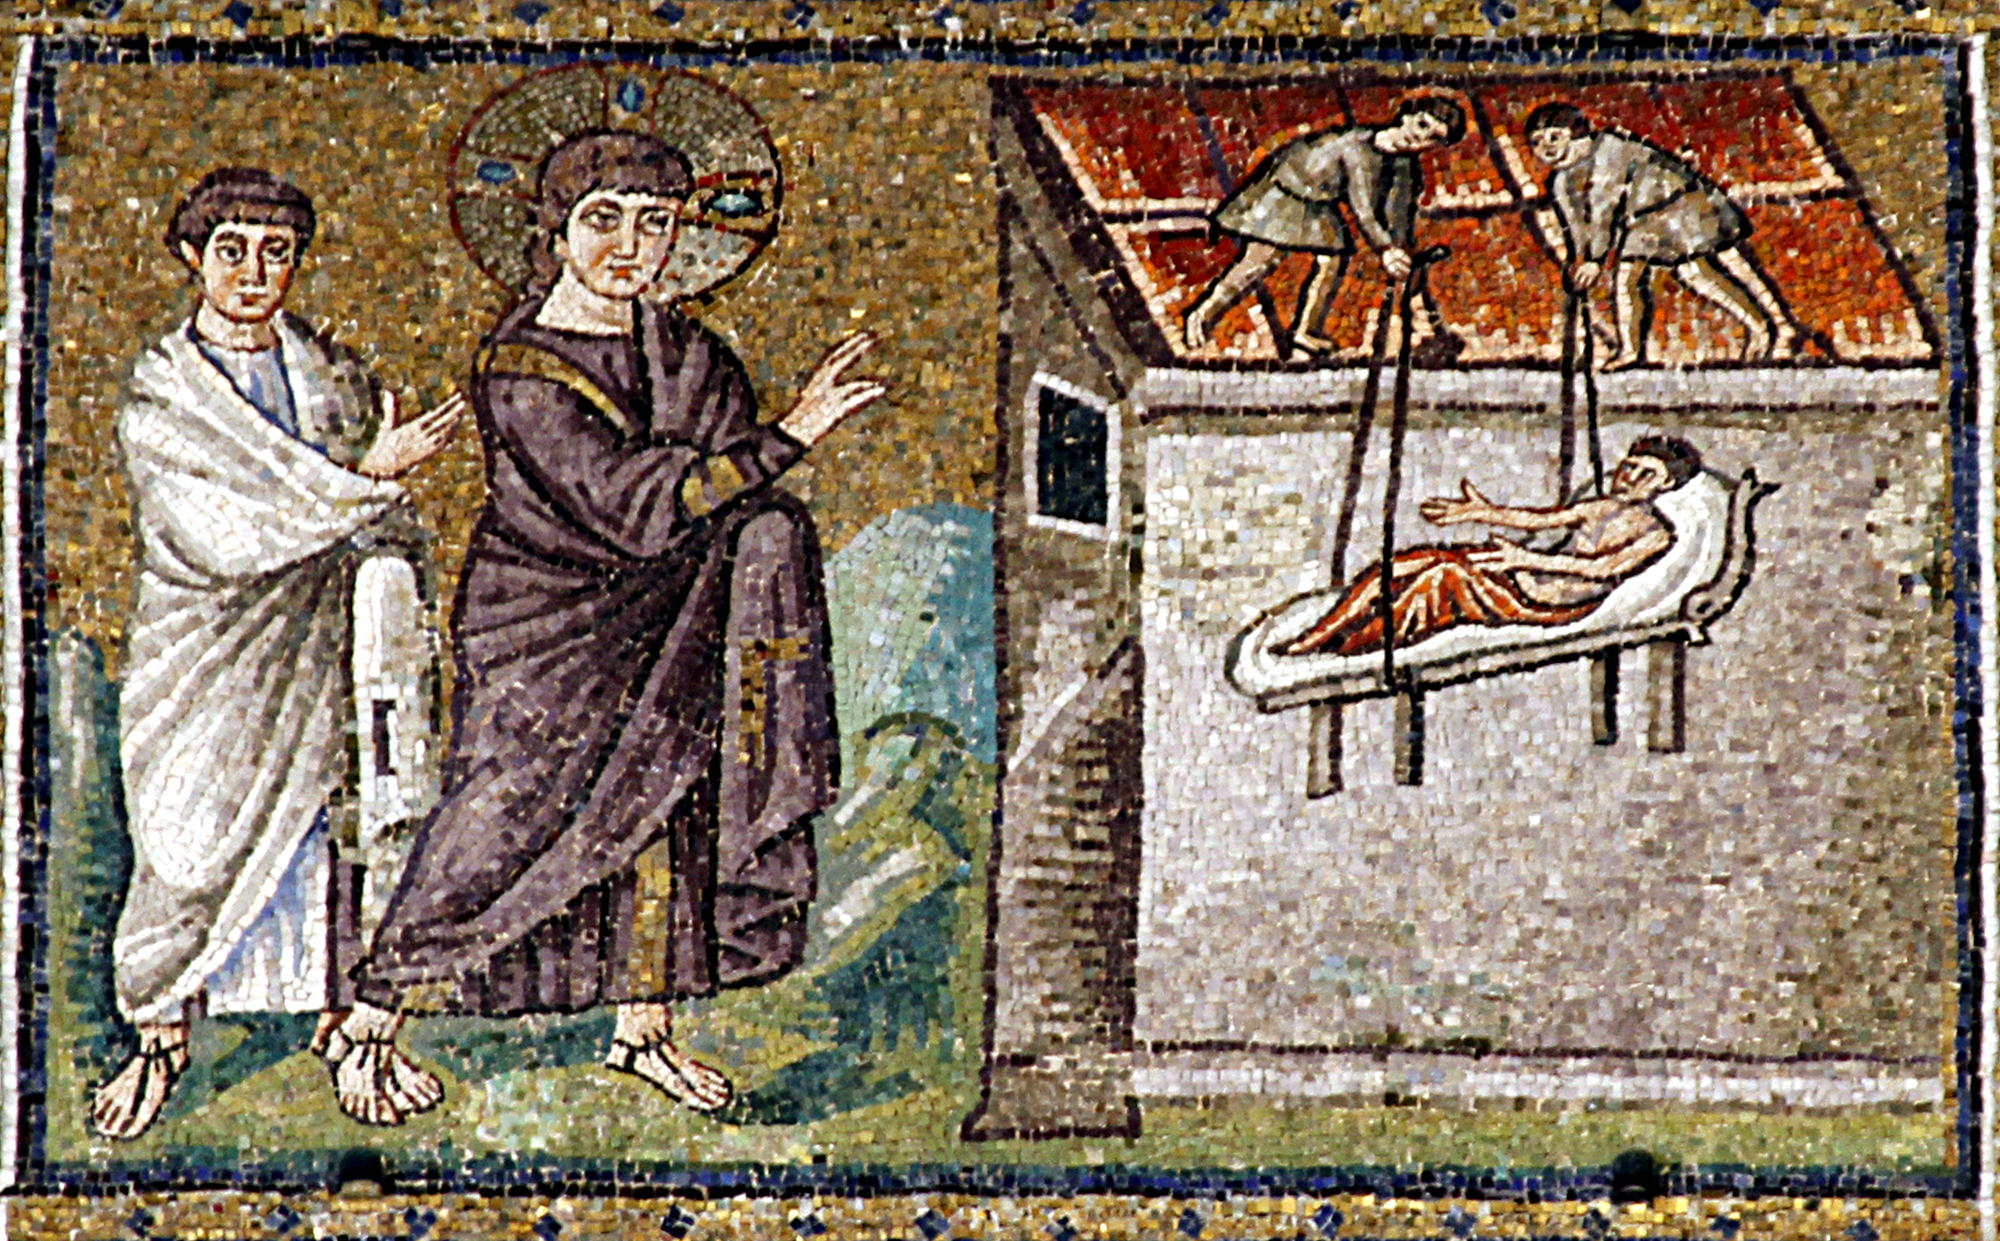 Sant' Apollinare: Jesus healing the paralytic in Cafarnaume